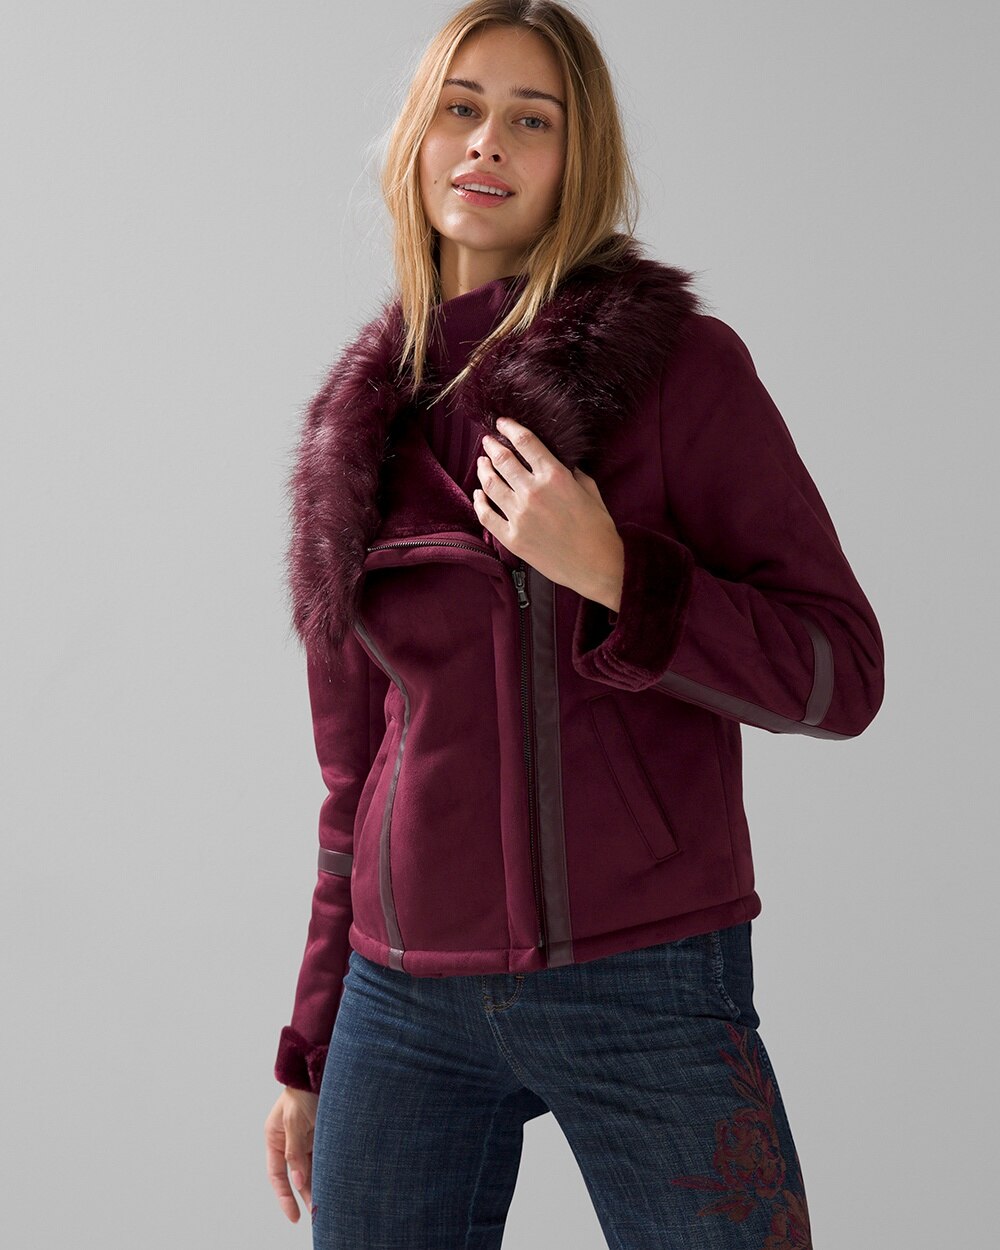 Faux Shearling Motorcycle Jacket video preview image, click to start video